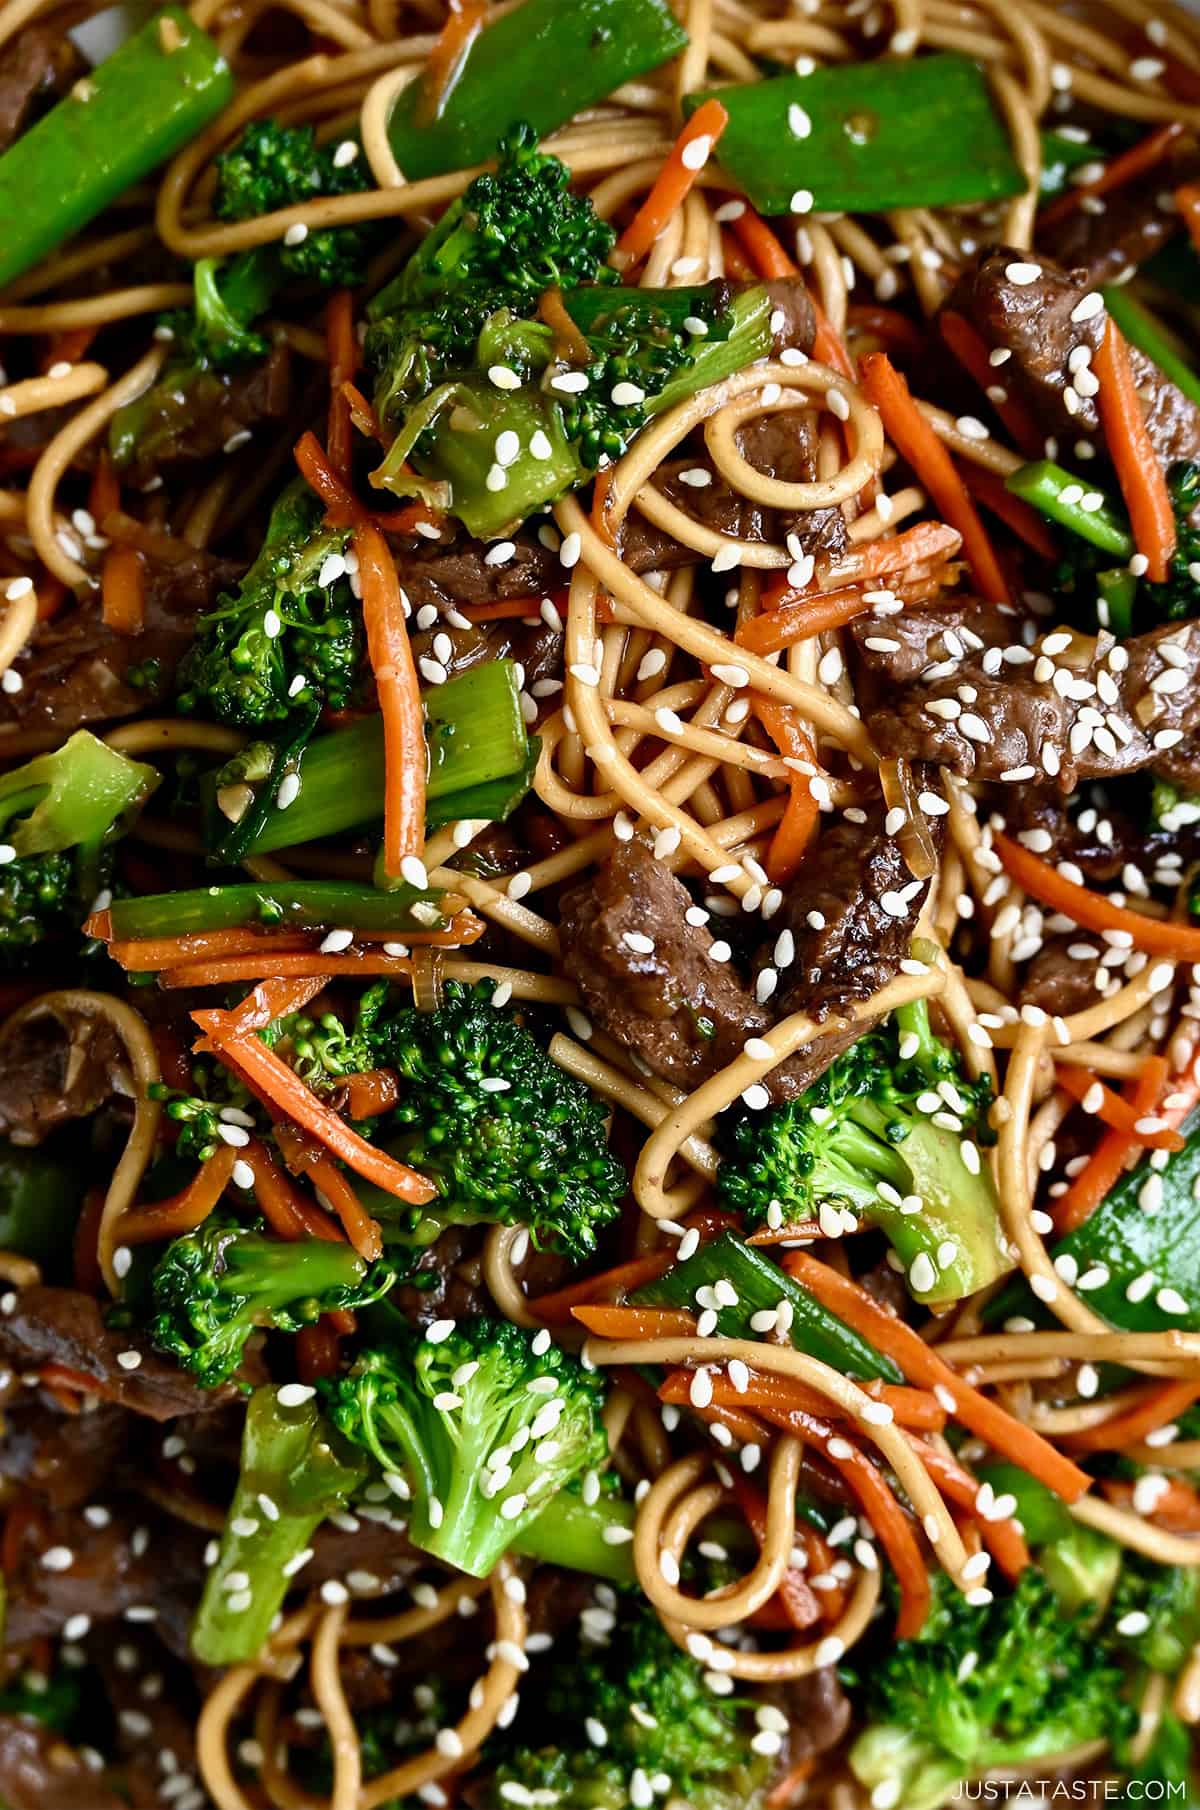 Beef lo mein with broccoli, carrots, scallions all tossed in a quick-fix sauce and garnished with sesame seeds.